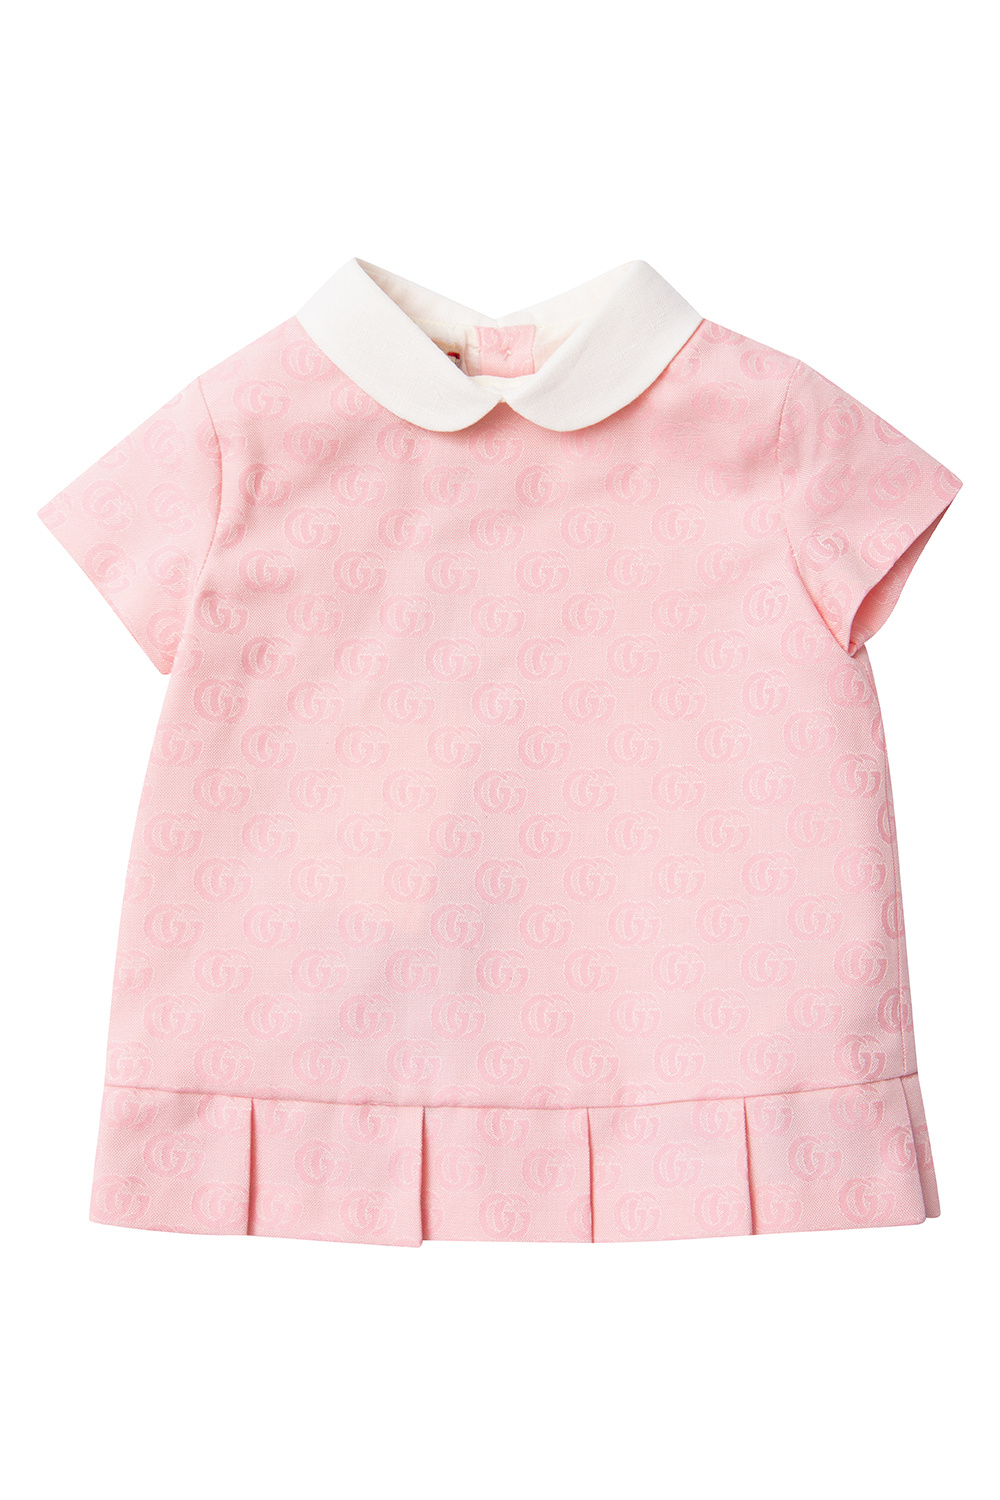 Gucci Kids Dress with collar